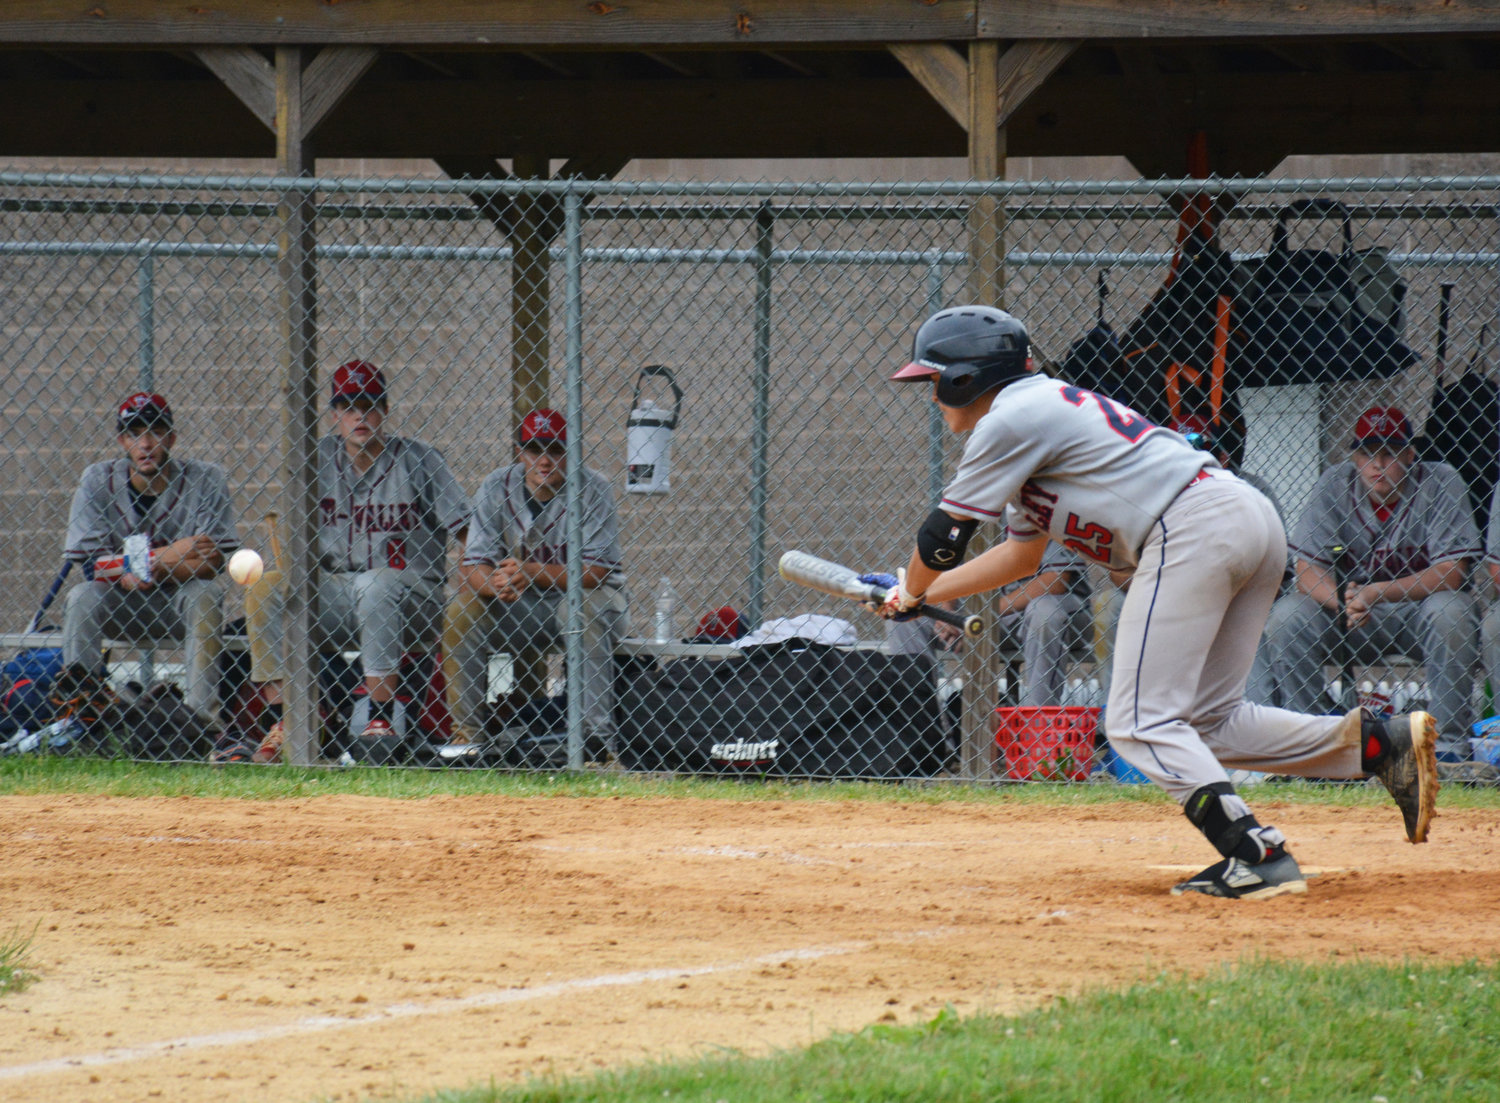 Tri-Valley's Sean Feliciano executes a perfect safety squeeze bunt to bring the go-ahead run home.